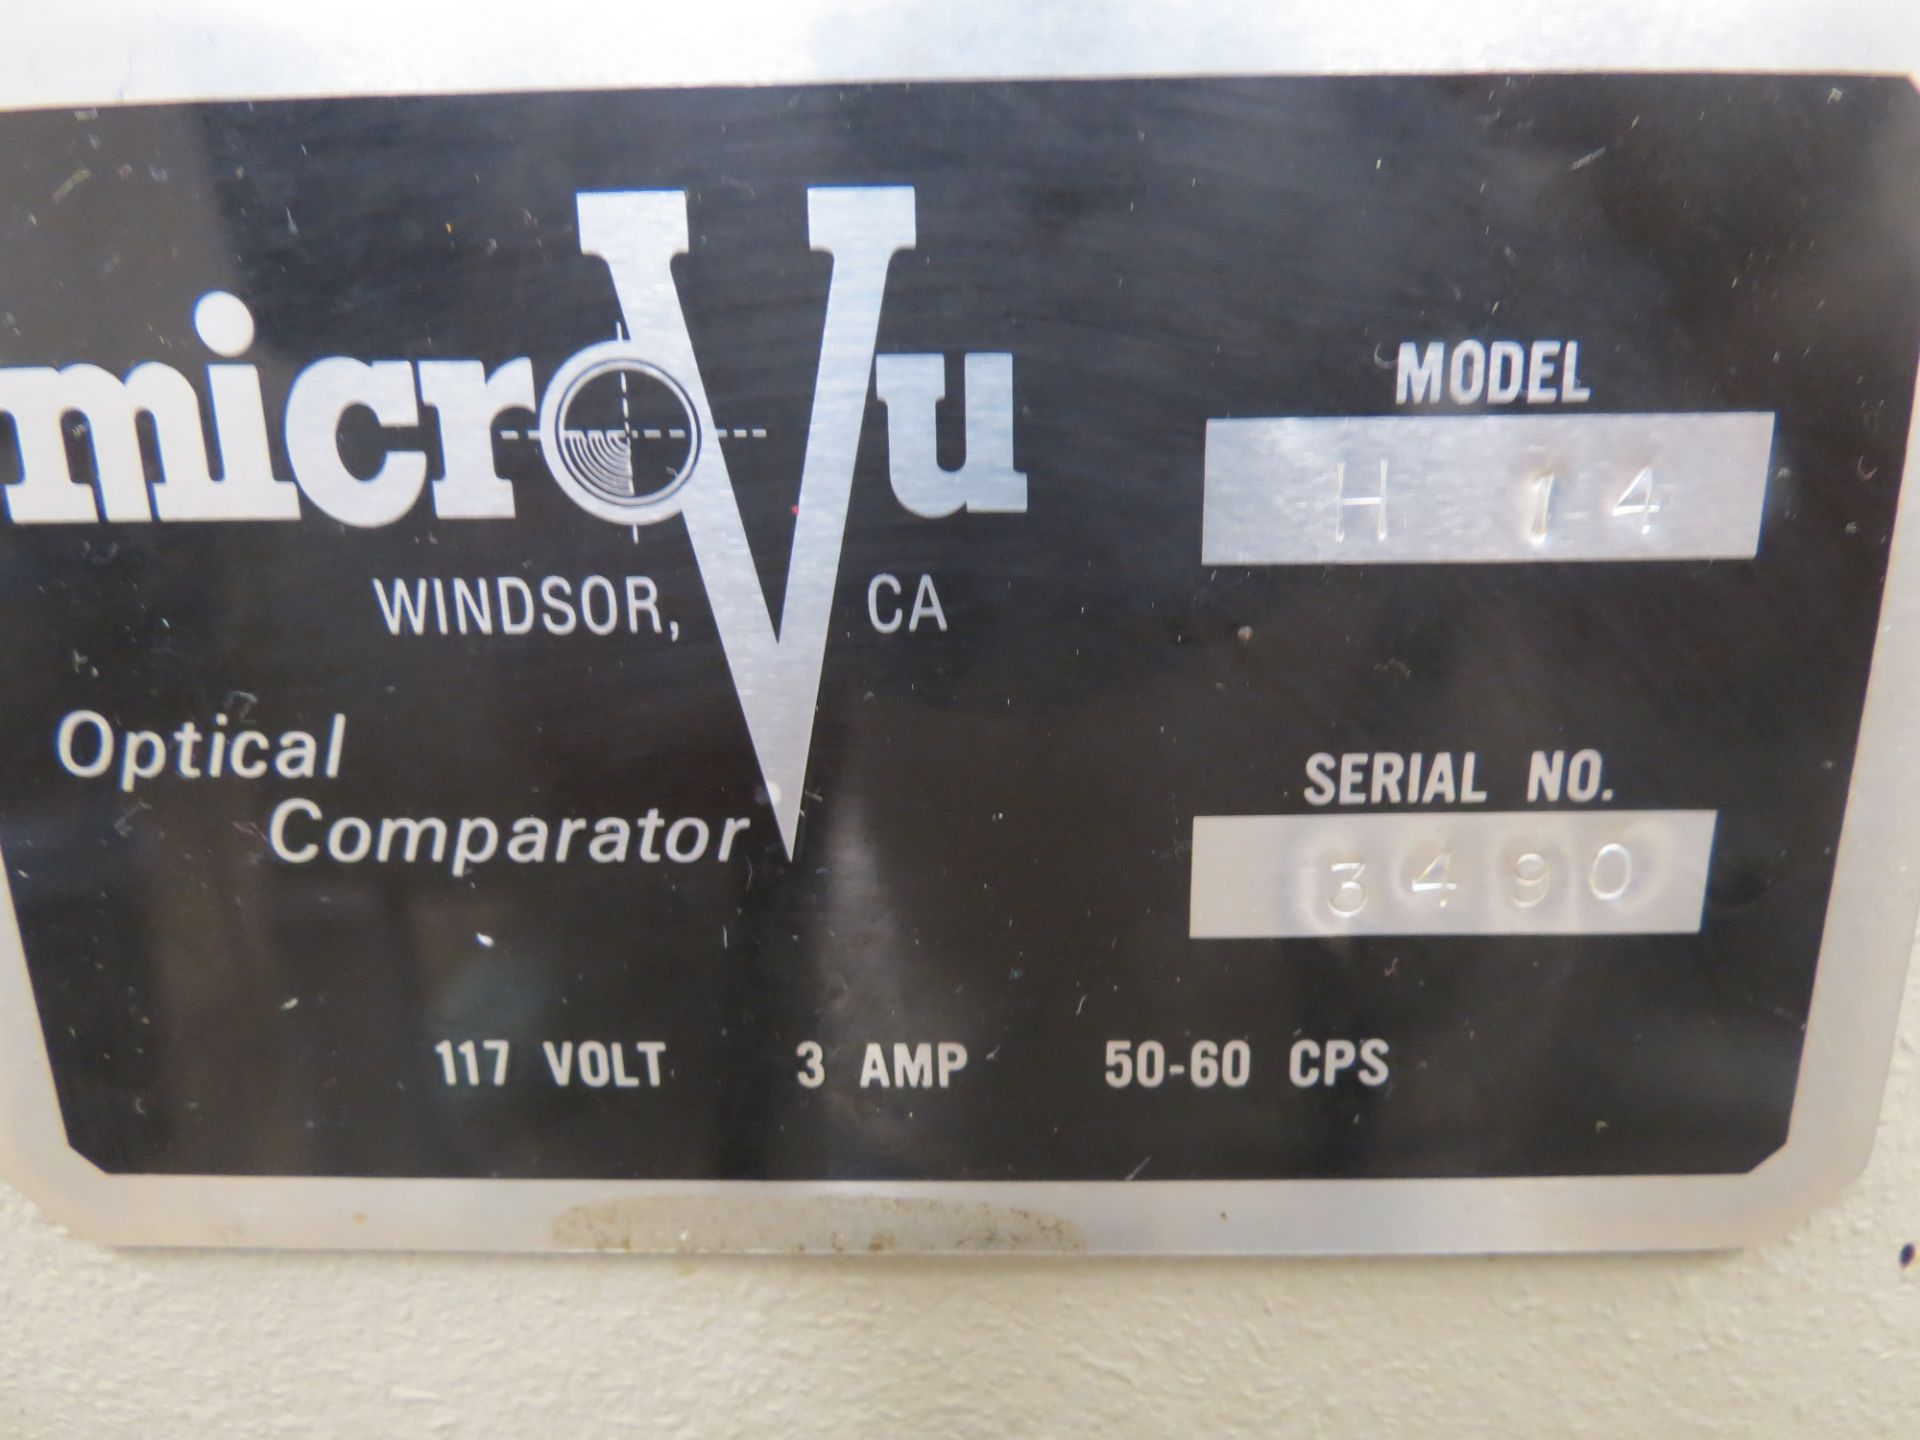 MicroVu Comparator Mdl # H-14, S/N # 3490 - Image 5 of 6